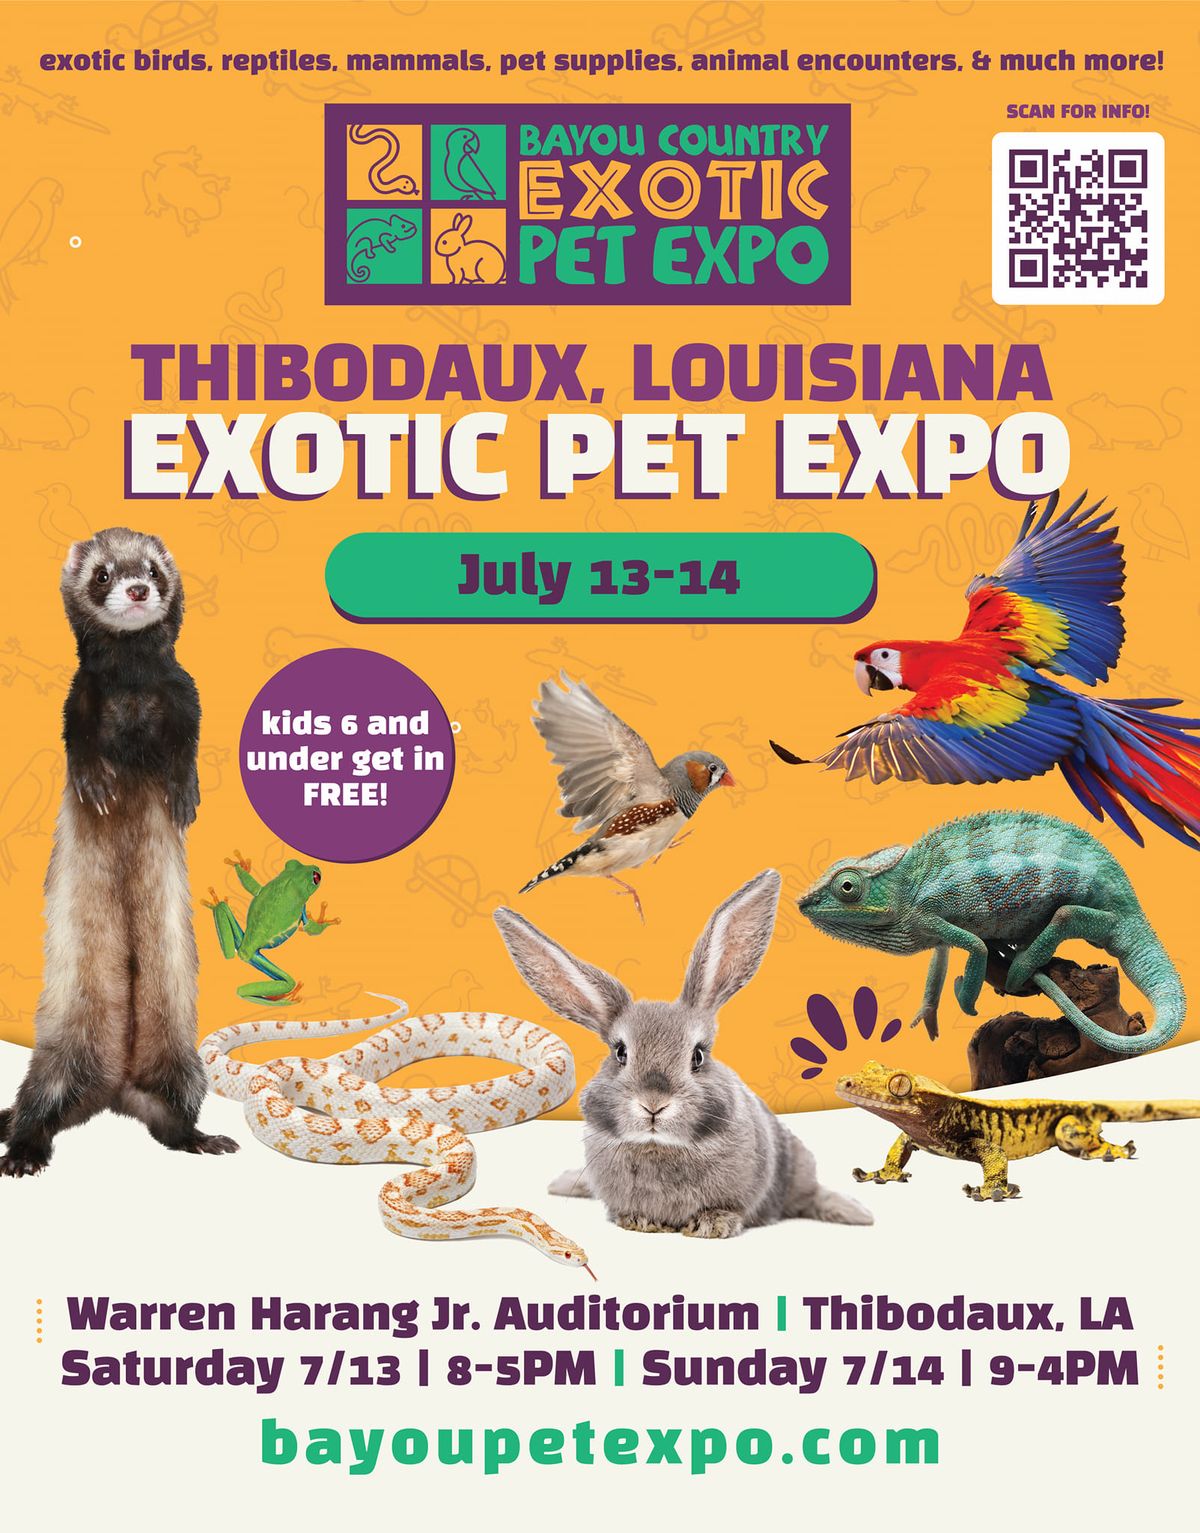 Bayou Country Exotic Pet Expo 